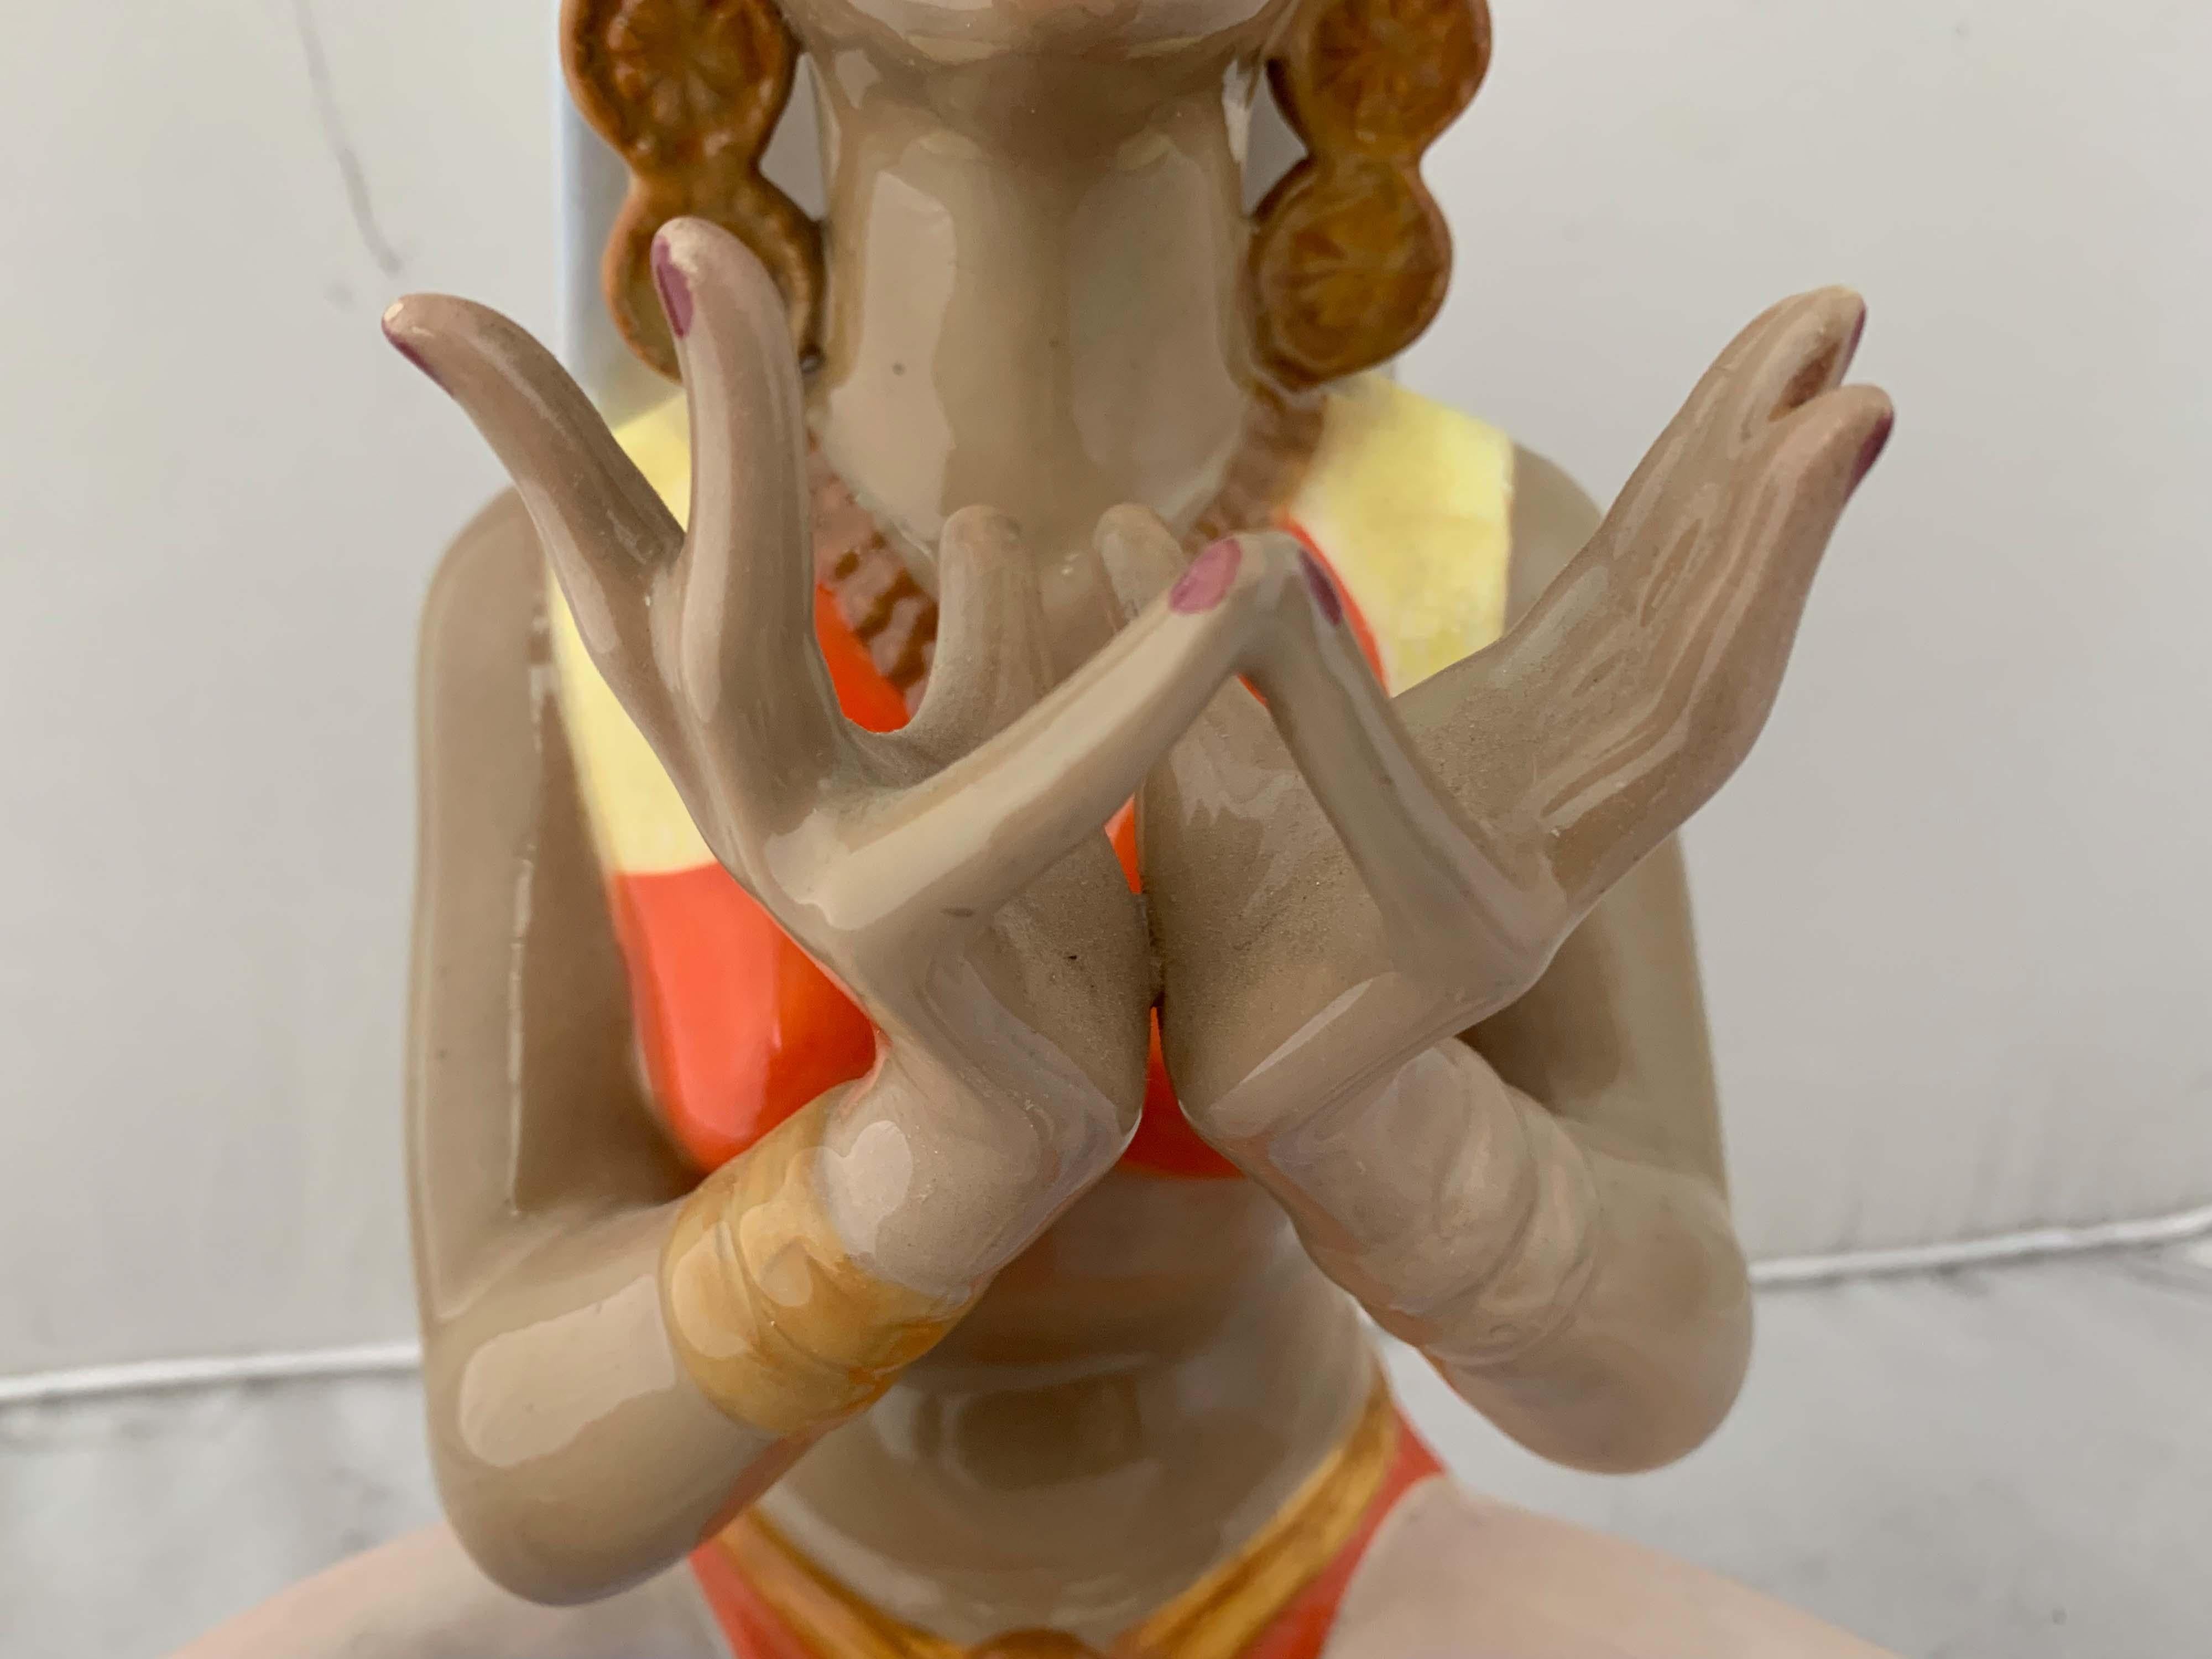 Mid-20th Century Figure of a Girl in a Meditative Pose by Caterina Manna for C.I.A. Manna Torino